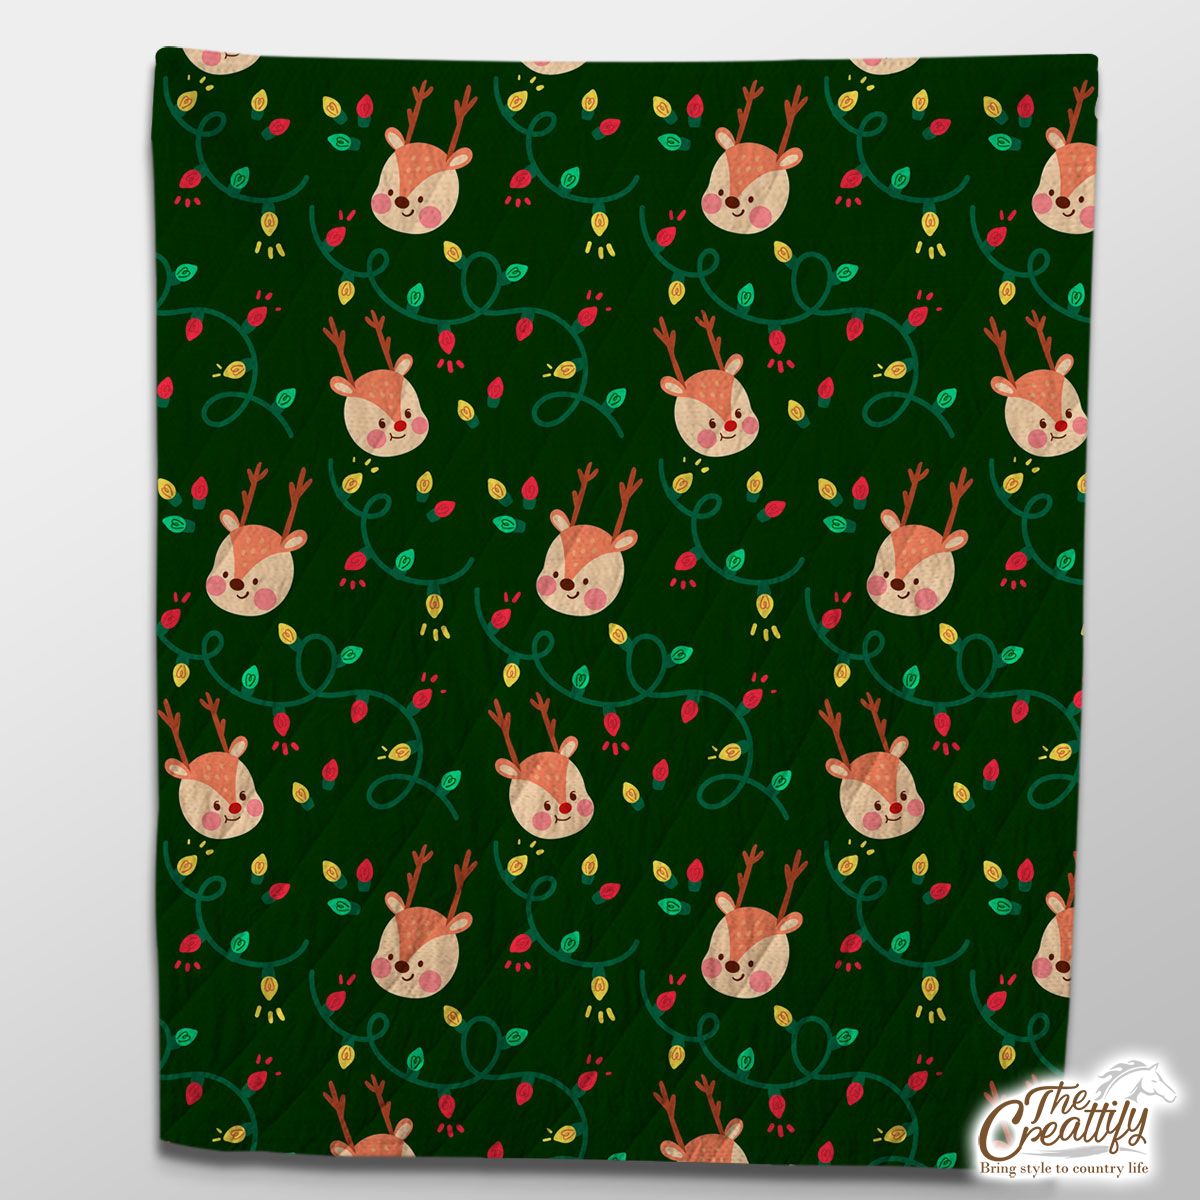 Reindeer With Christmas Light On Green Background Quilt